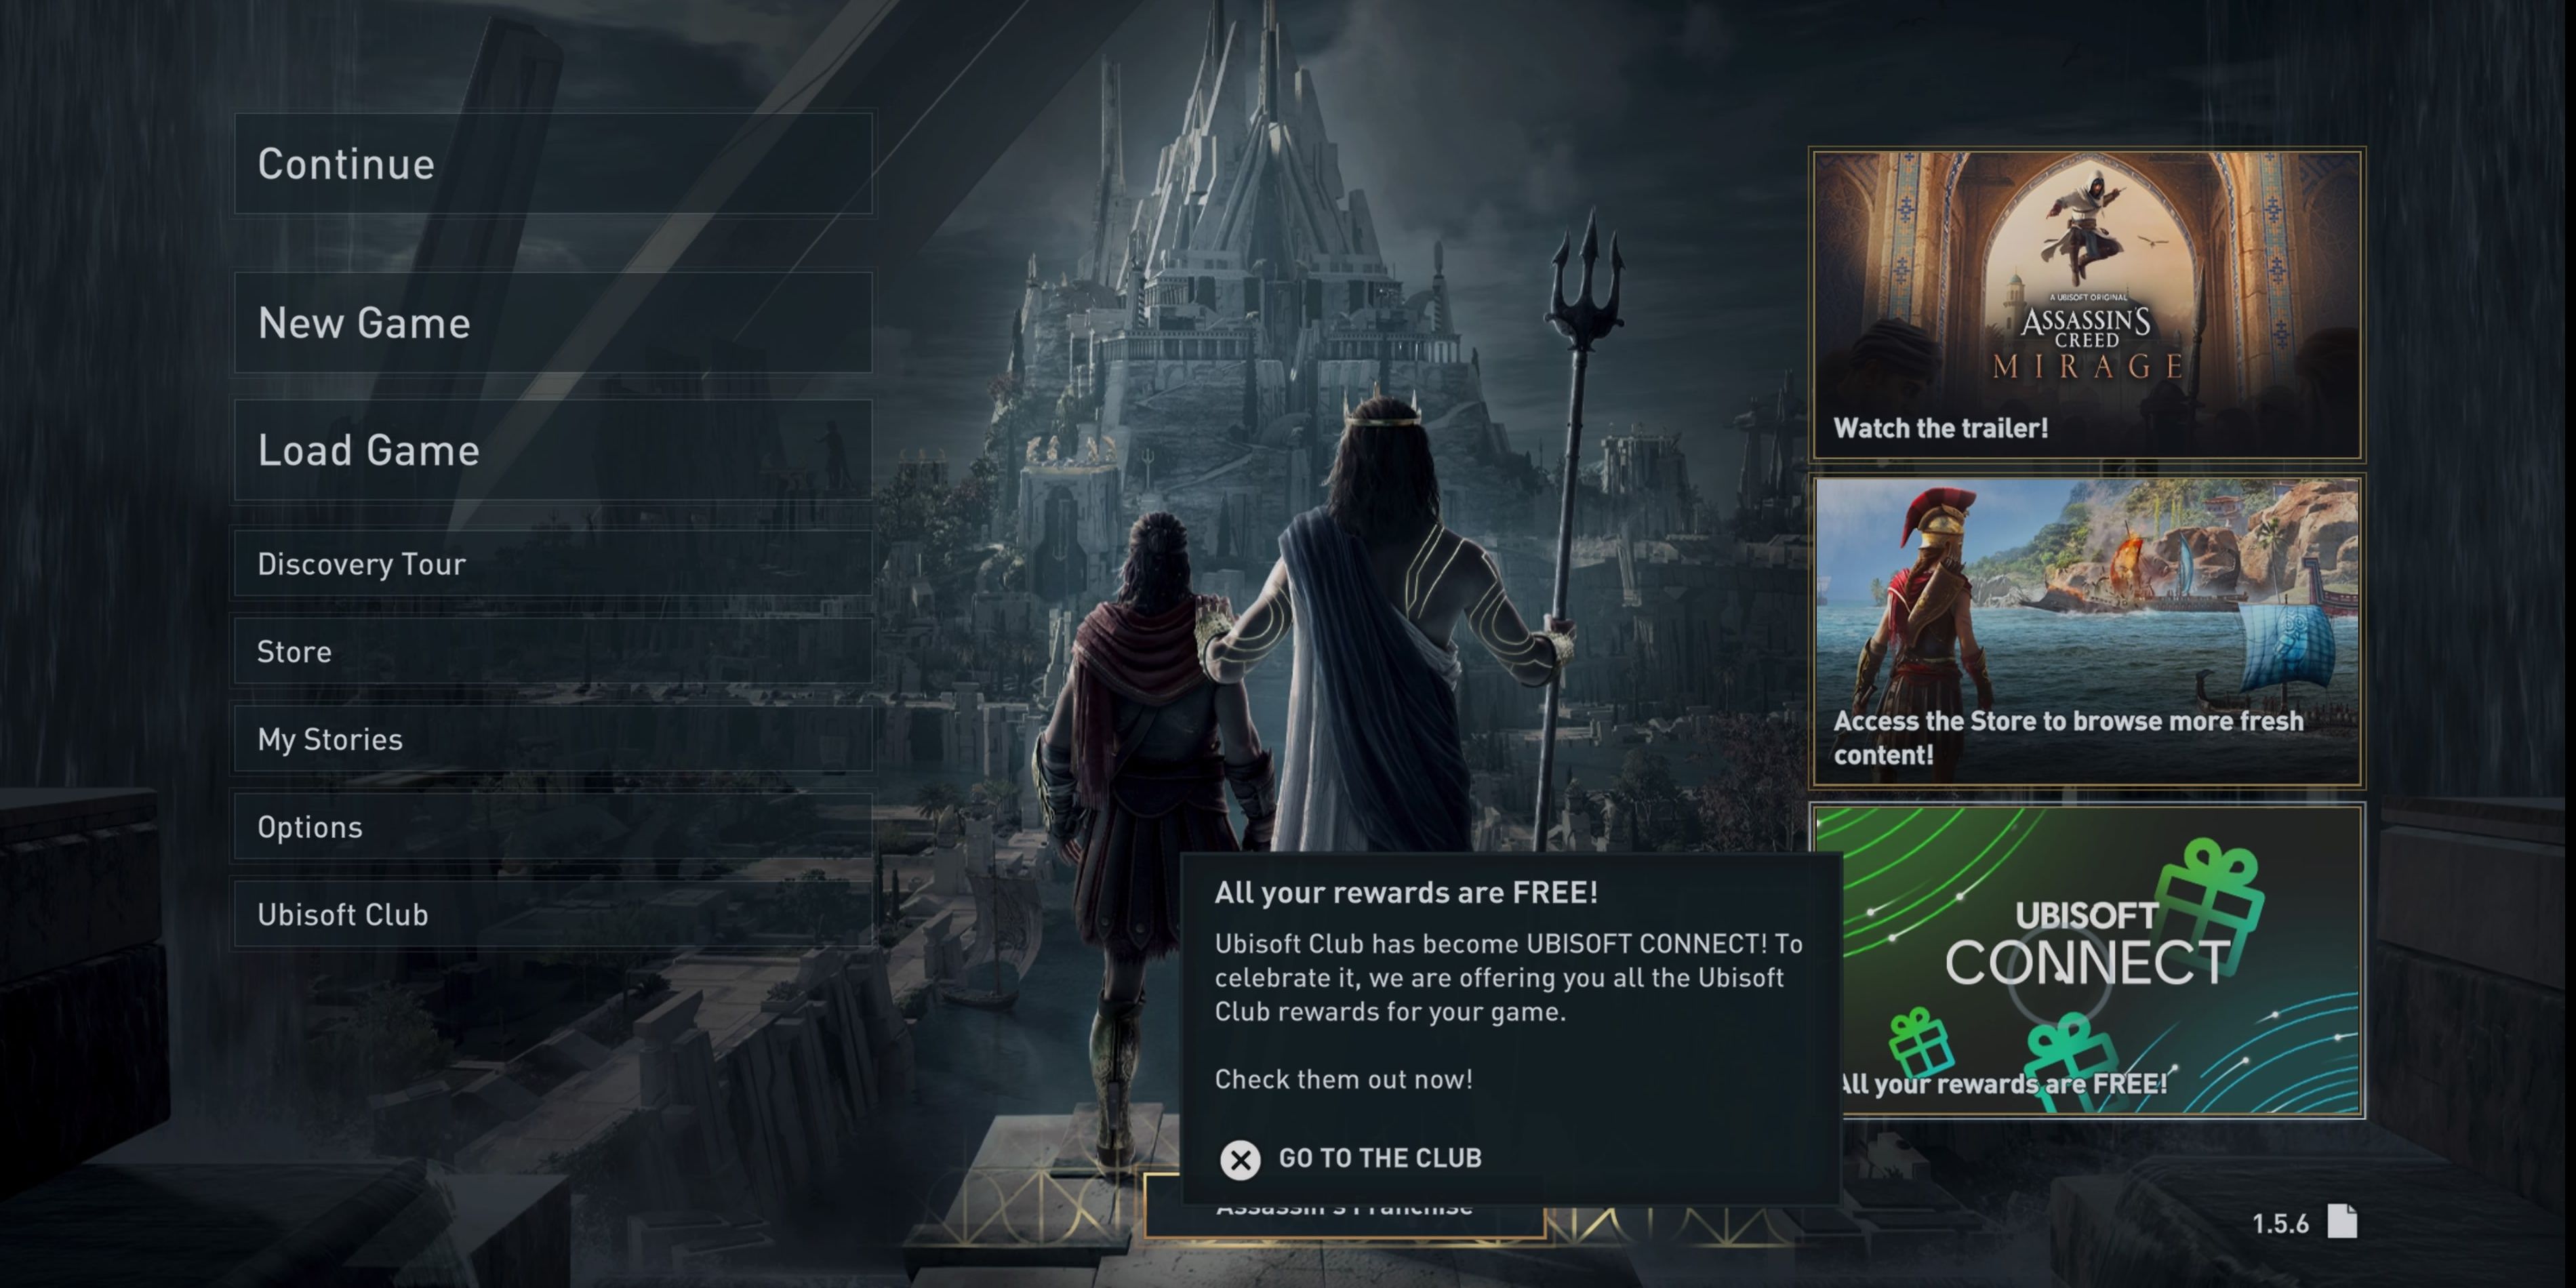 Assassin's Creed Odyssey Main Menu with Ubisoft Connect Rewards highlighted